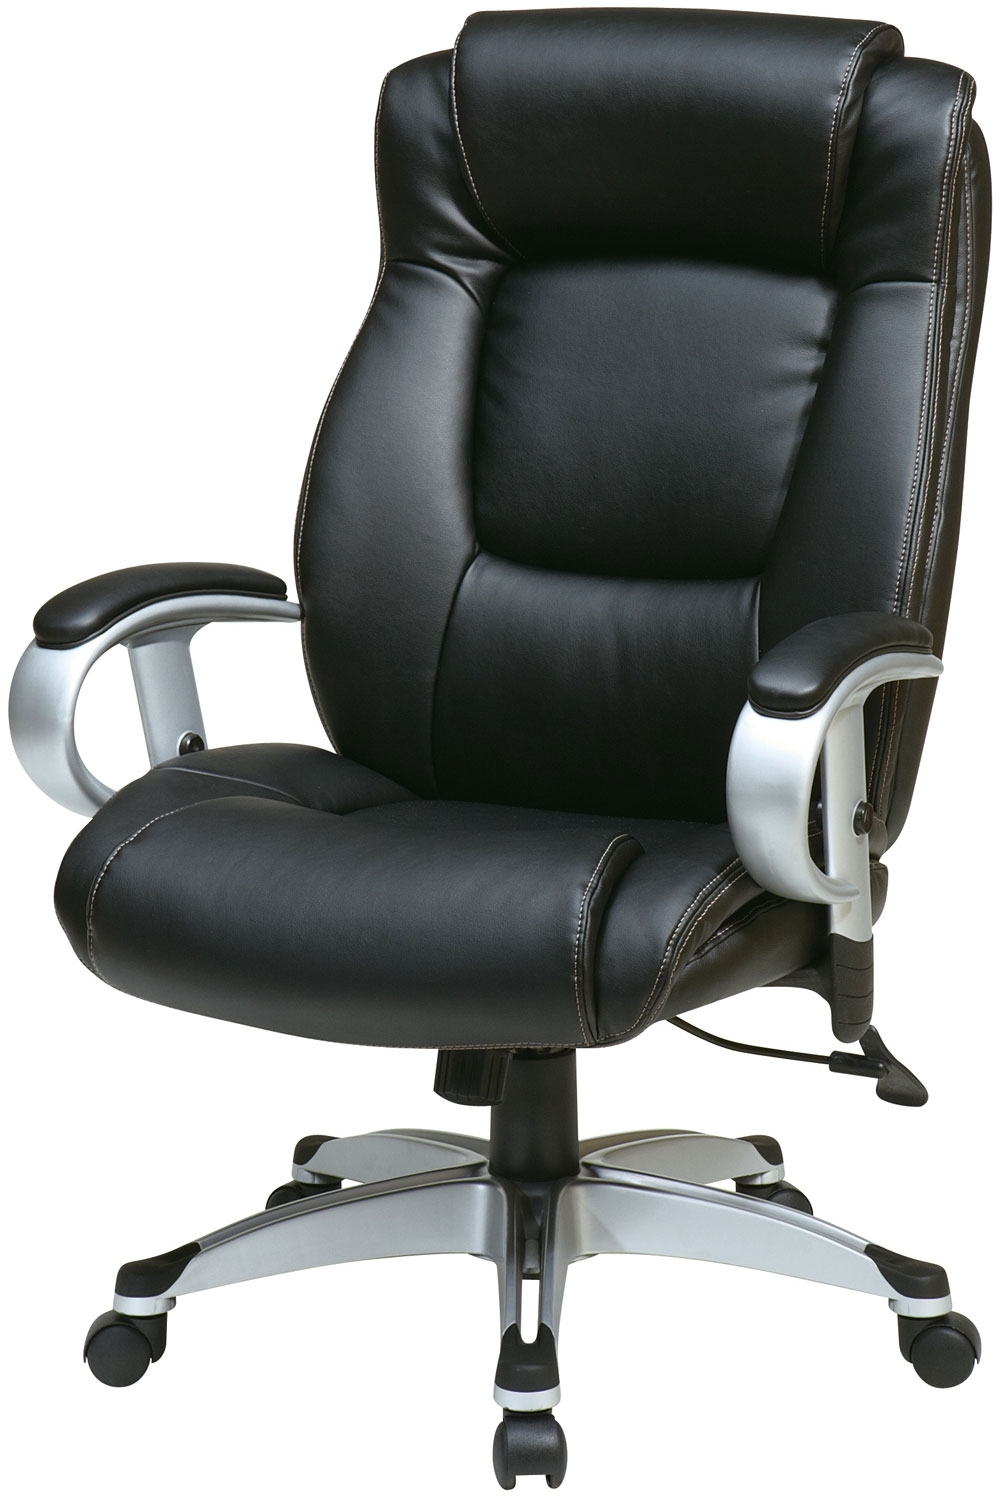 Executive Office Chairs With Adjustable Arms